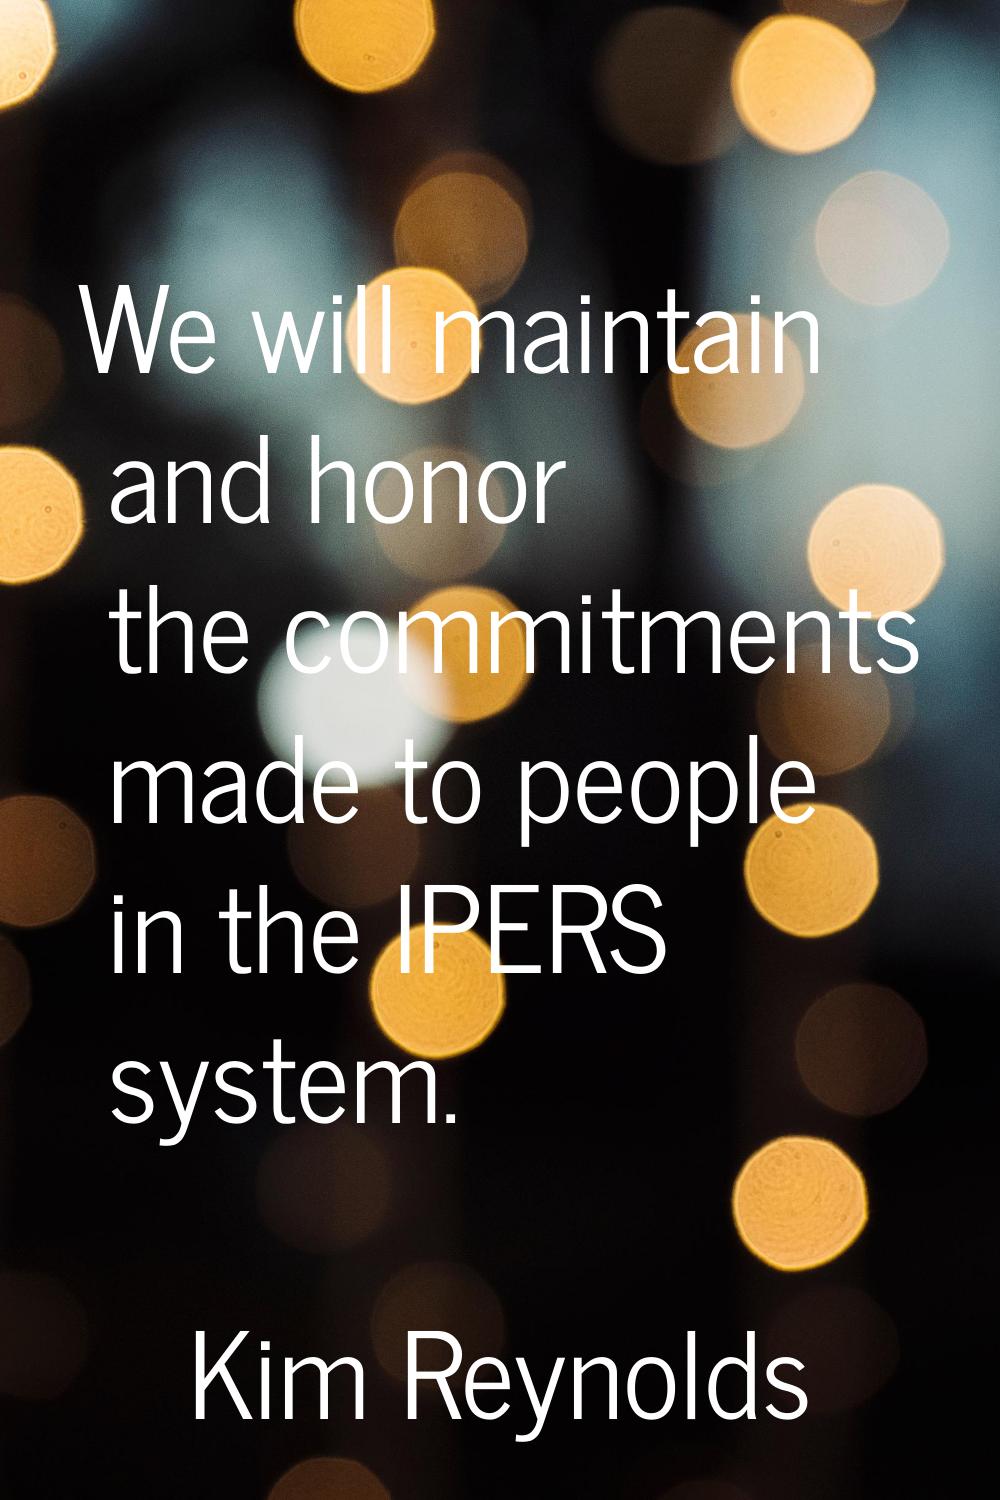 We will maintain and honor the commitments made to people in the IPERS system.